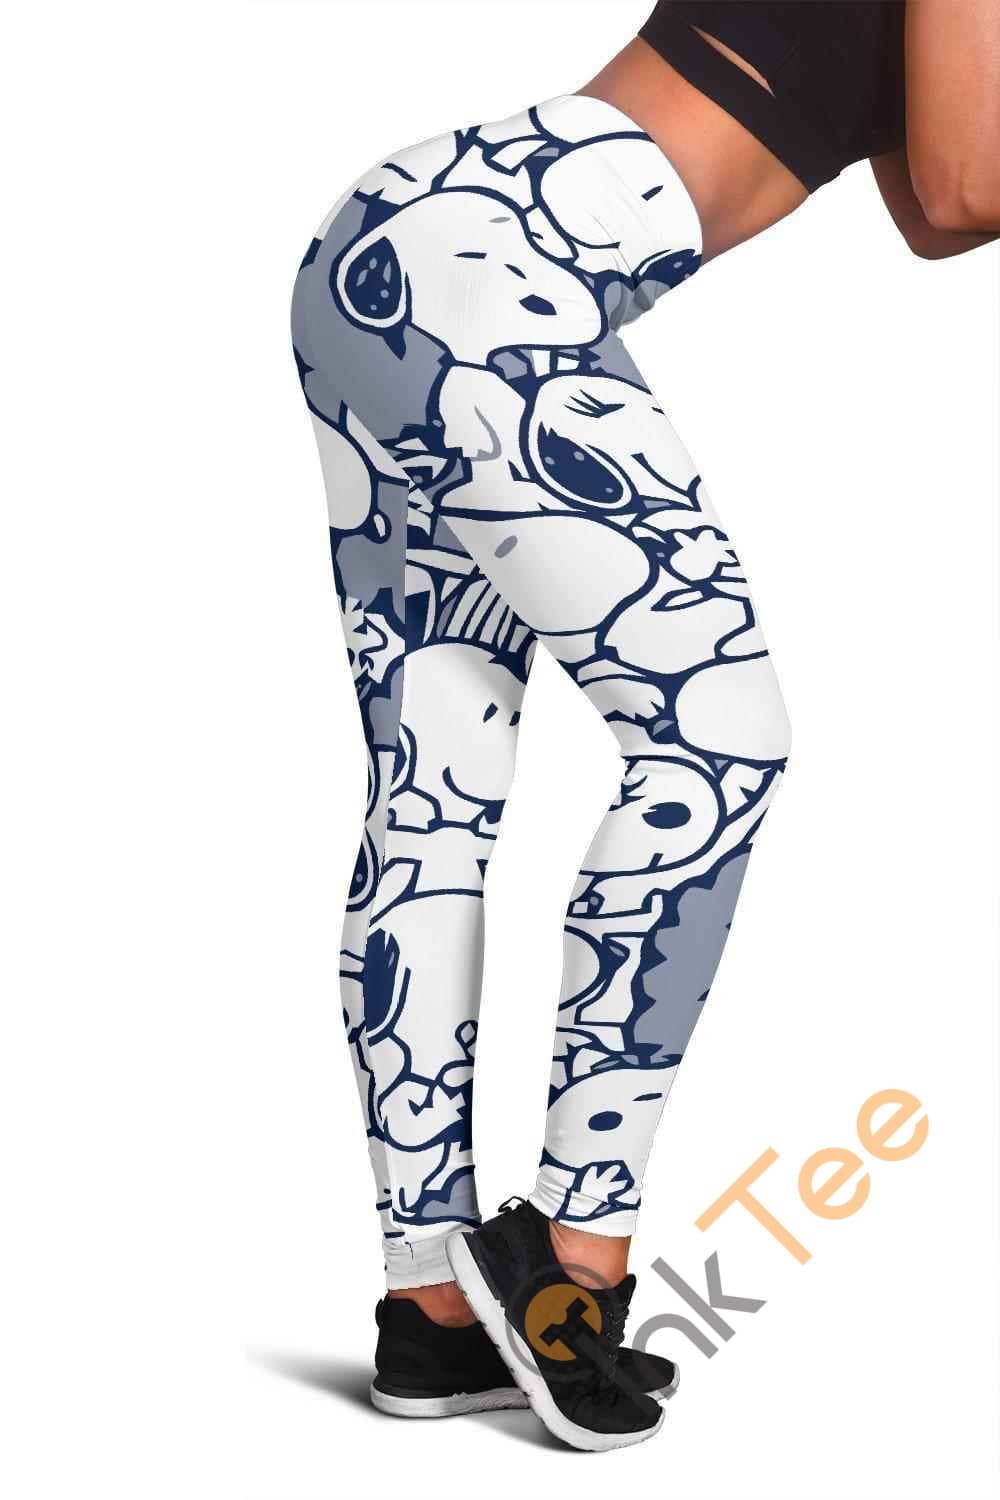 Inktee Store - Navy - Snoopy - 3D All Over Print For Yoga Fitness Women'S Leggings Image